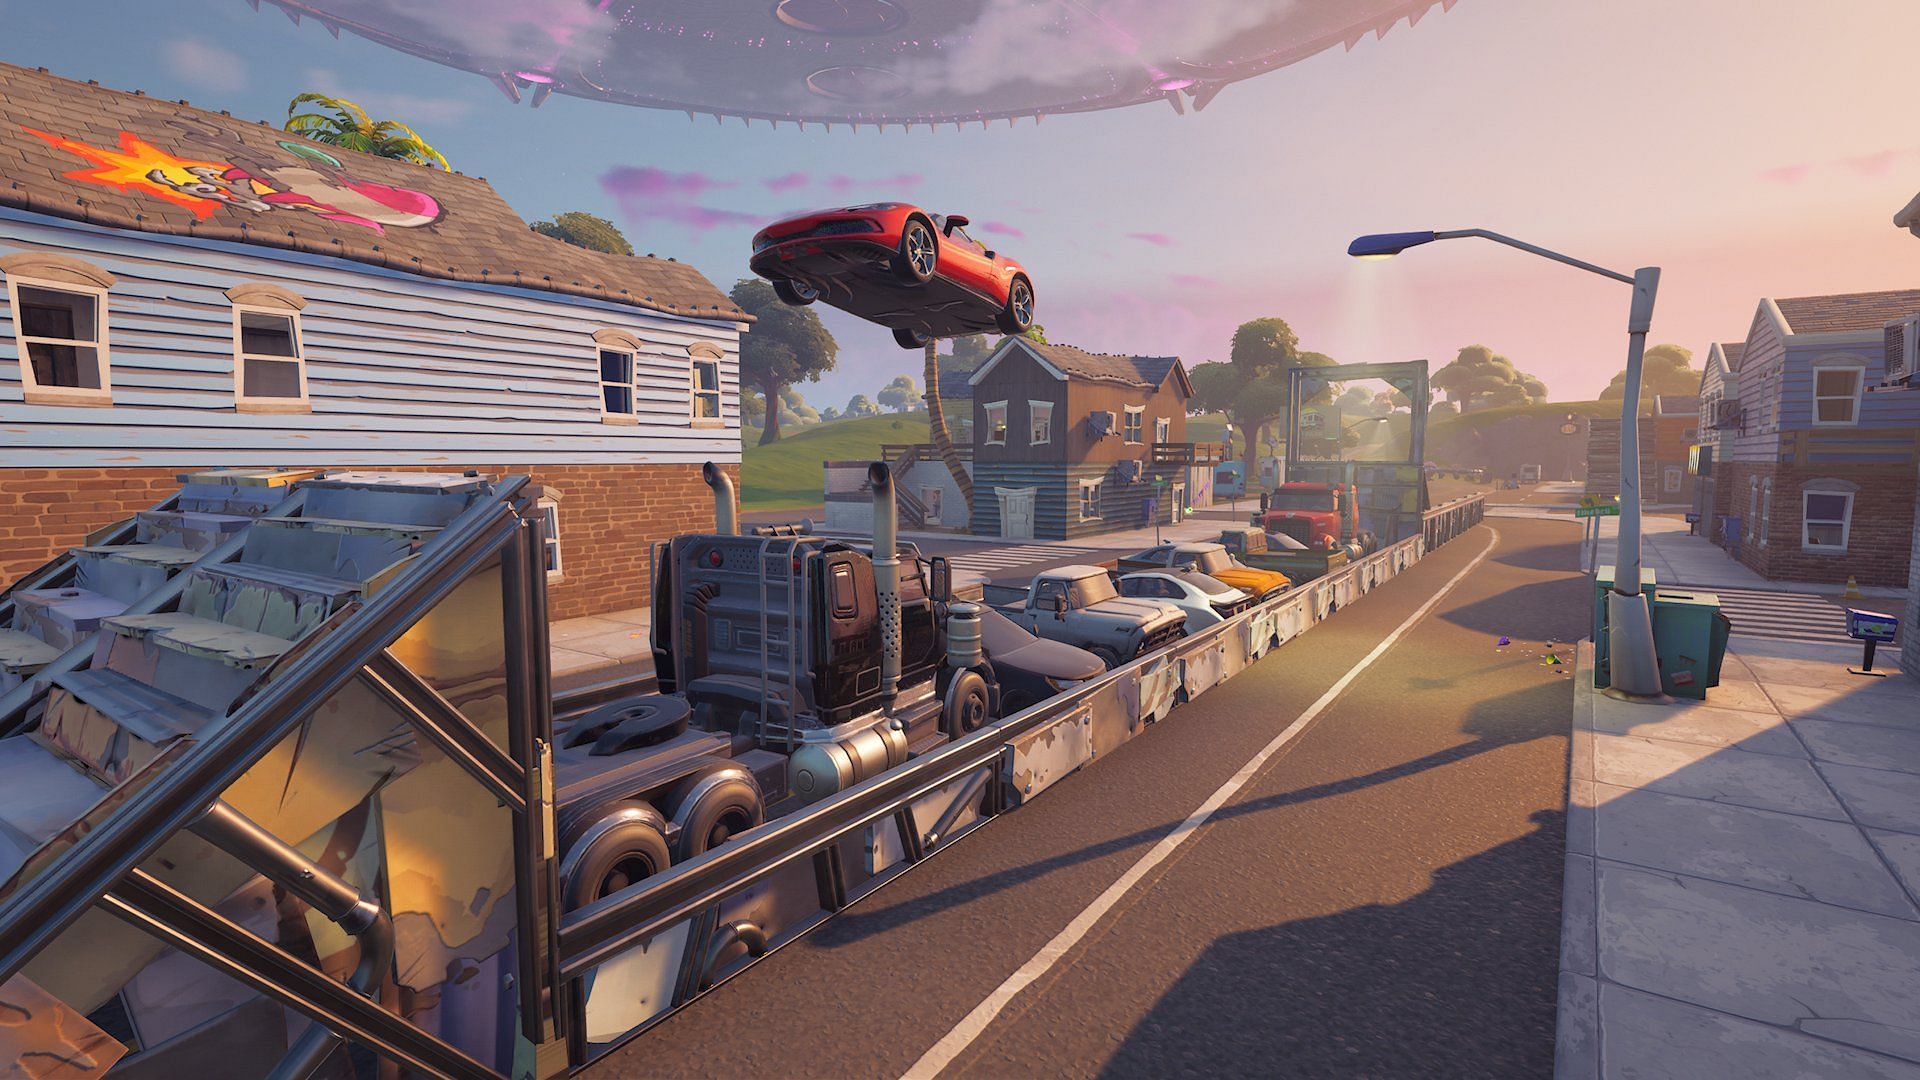  Unmanned vehicle are dangerous in Fortnite (Image via Twitter/Electroidzz)